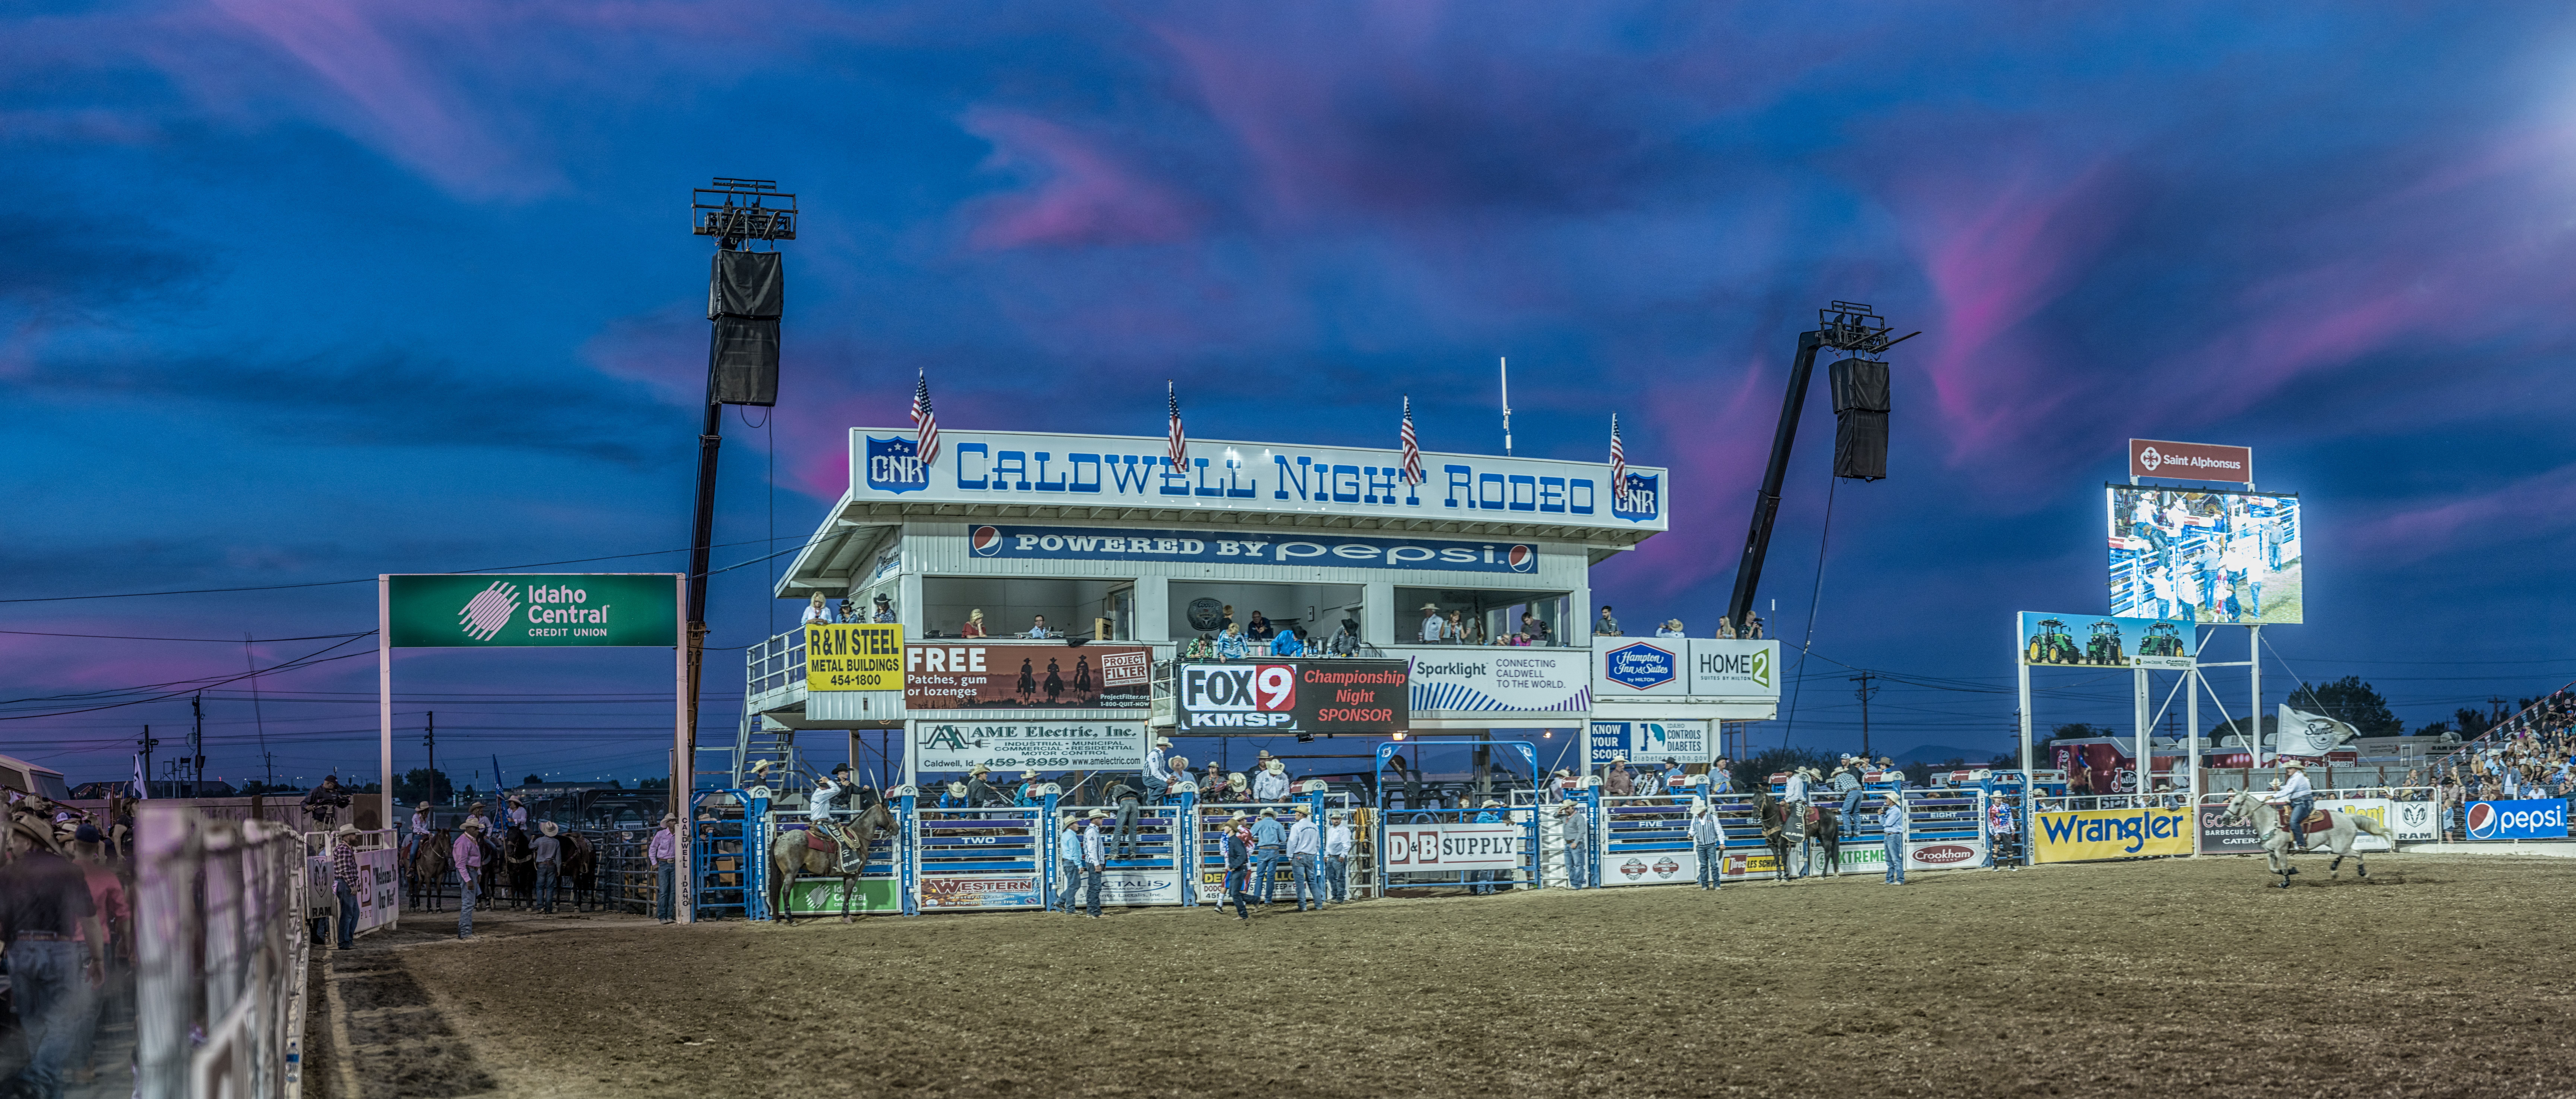 Caldwell Night Rodeo Announcer's Stand